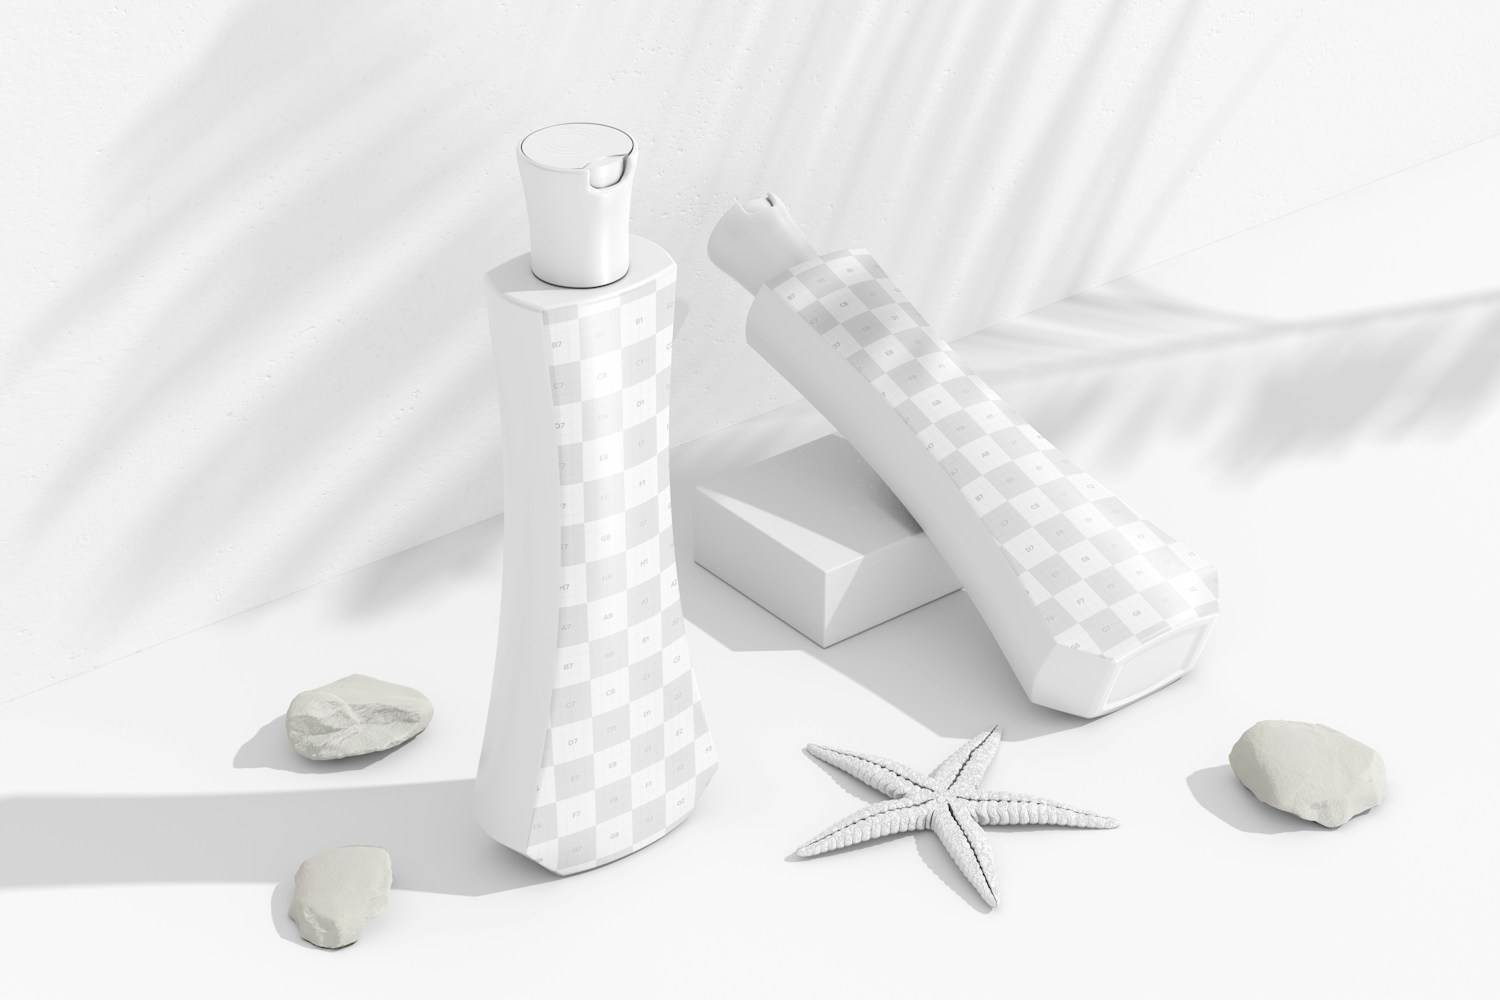 250 ml Cream Bottles Mockup, Standing and Dropped